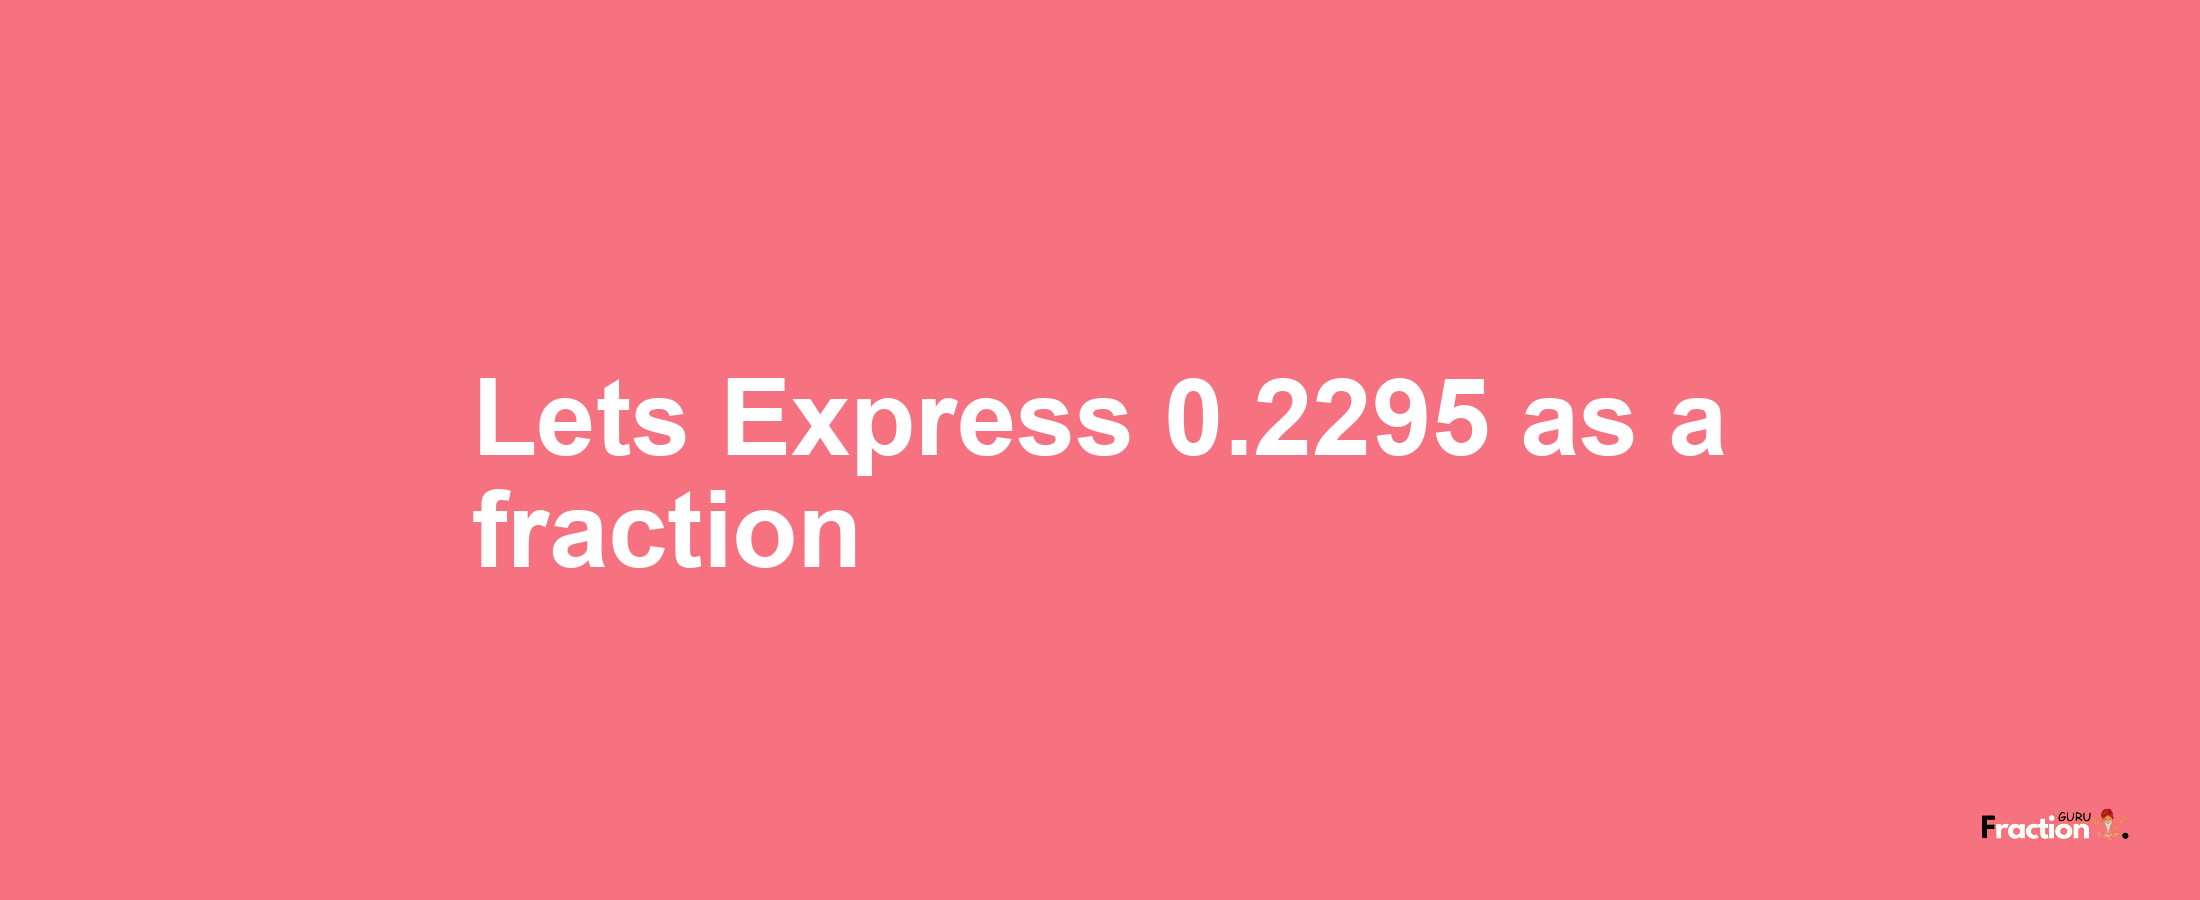 Lets Express 0.2295 as afraction